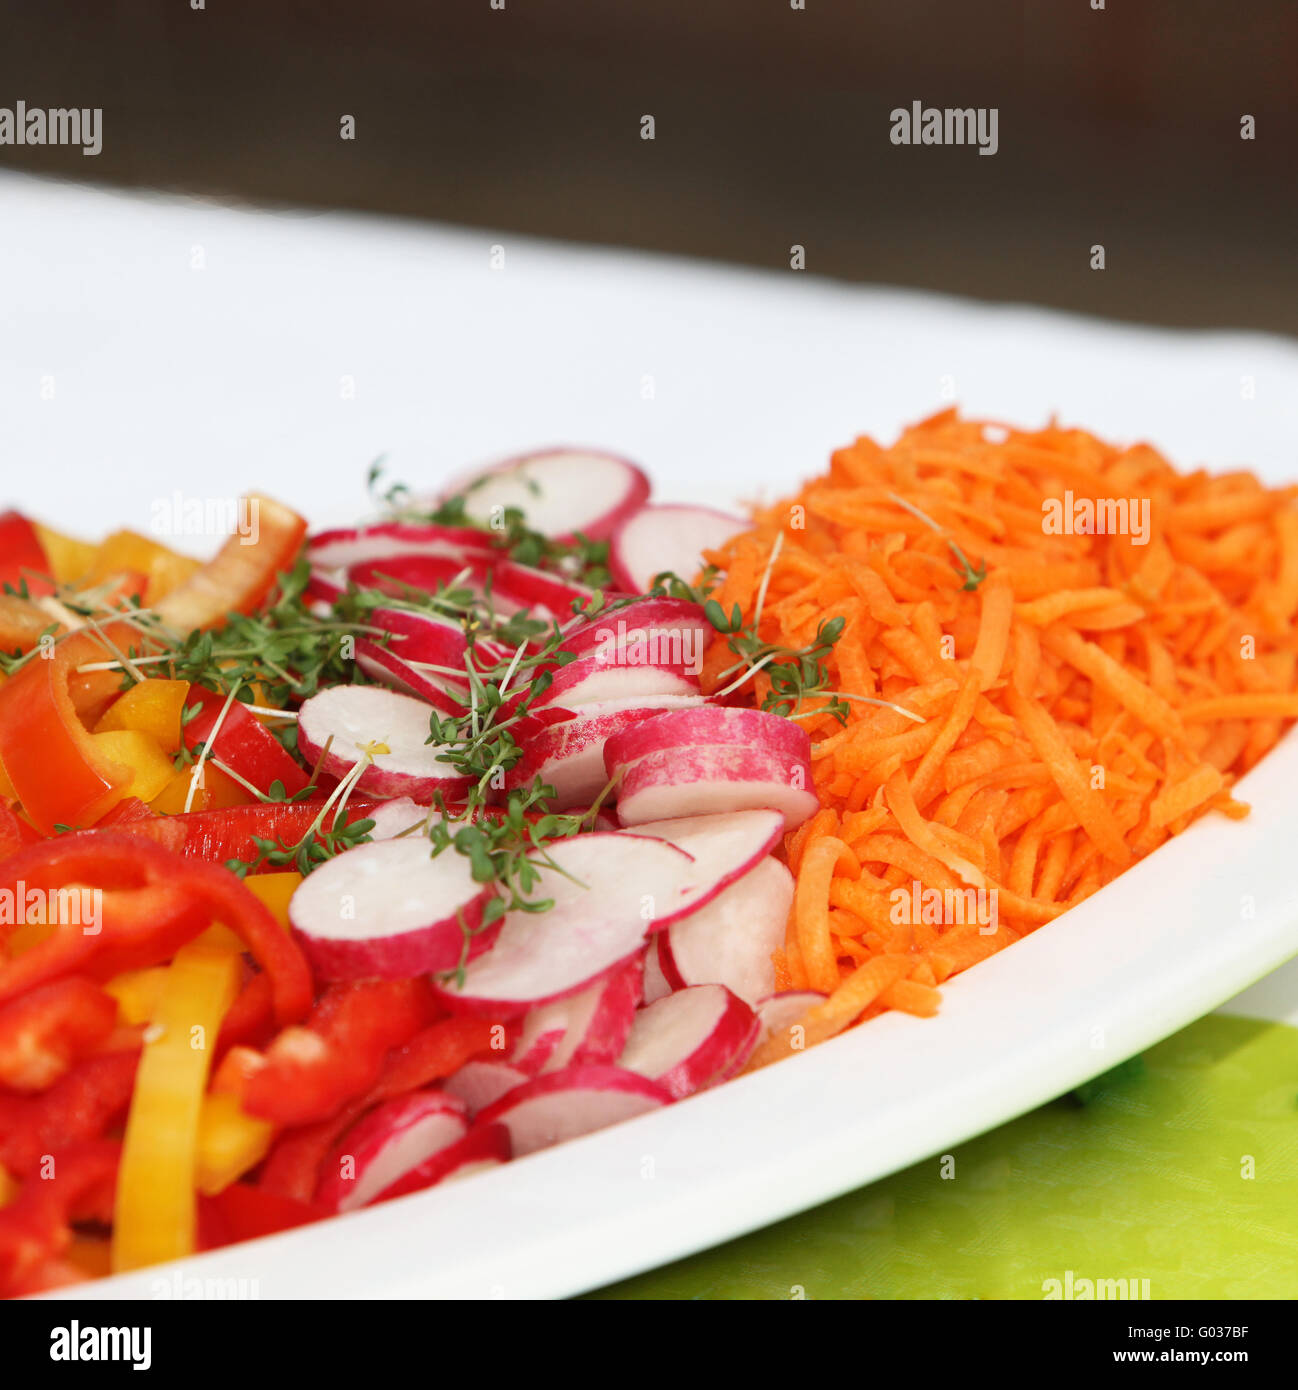 garnished, fresh salad with radishes, carrots and Stock Photo